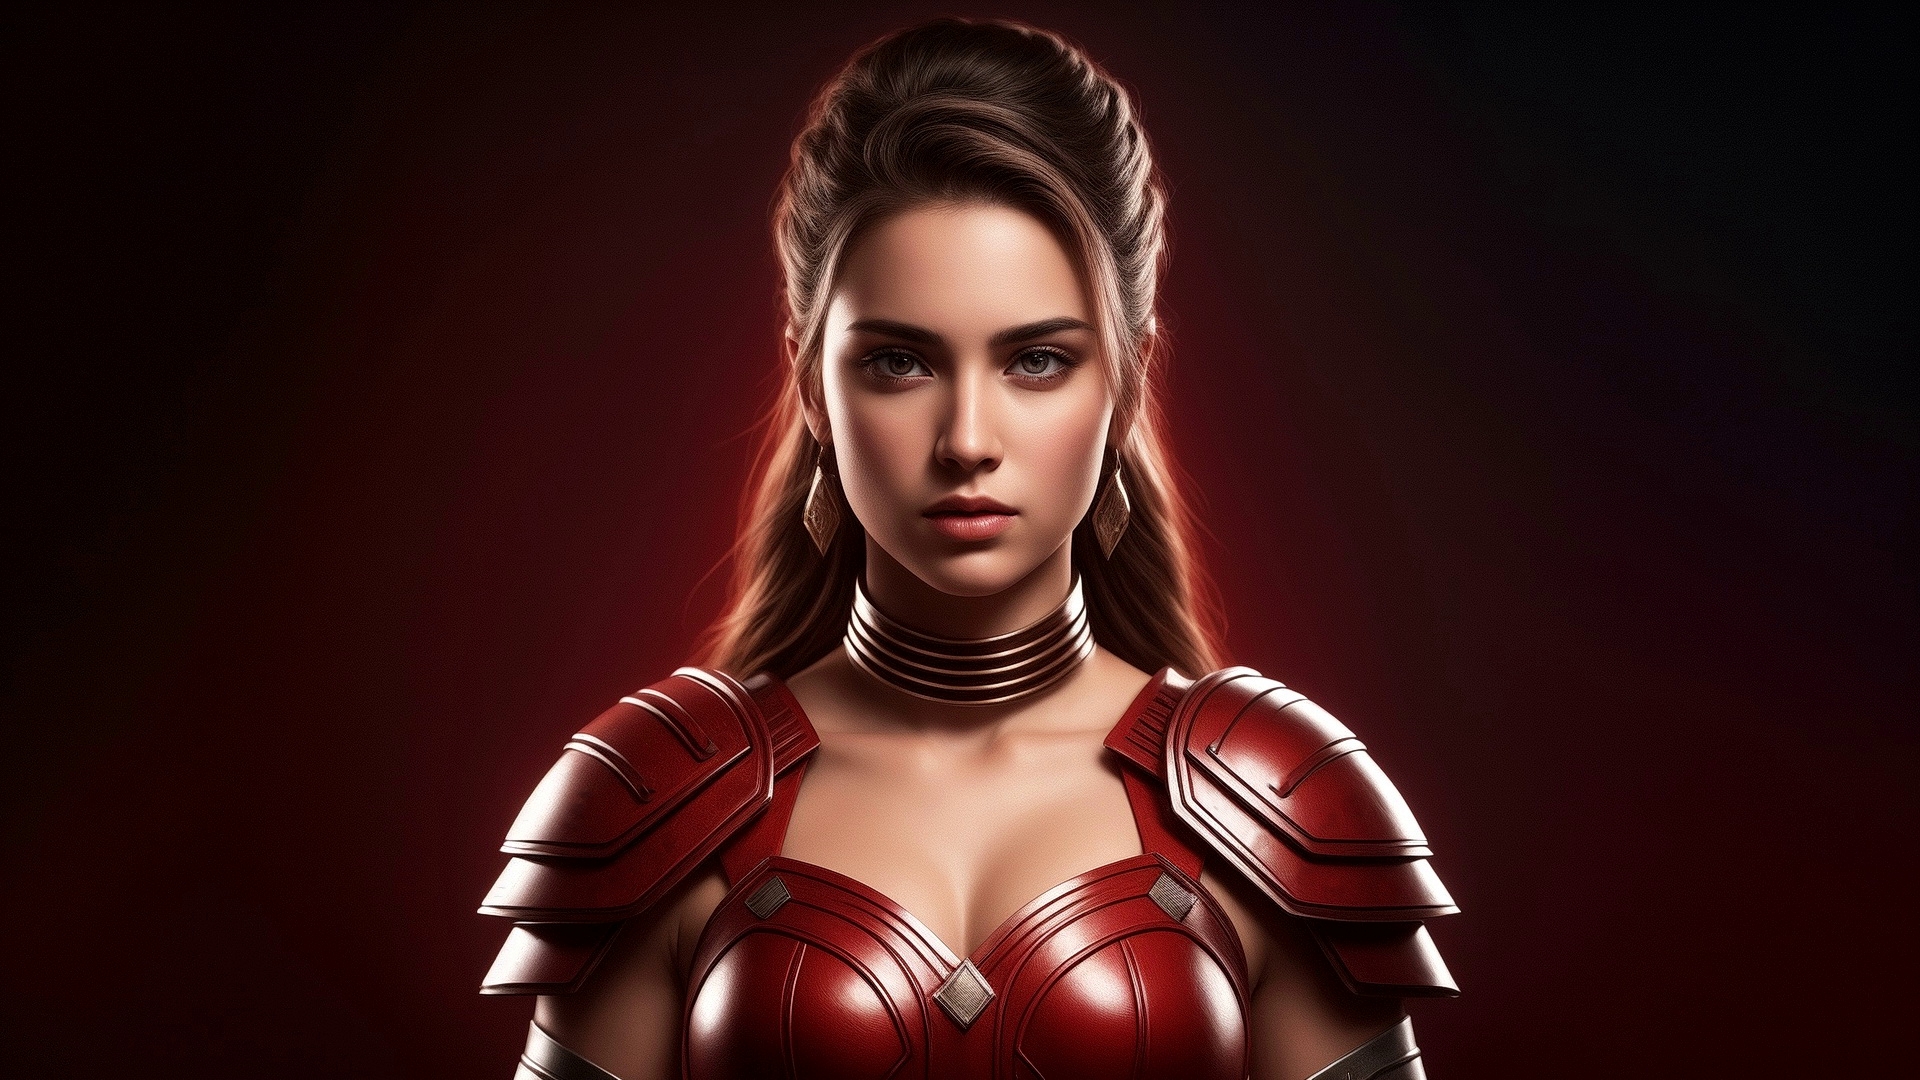 Portrait of a girl in armor on a red background